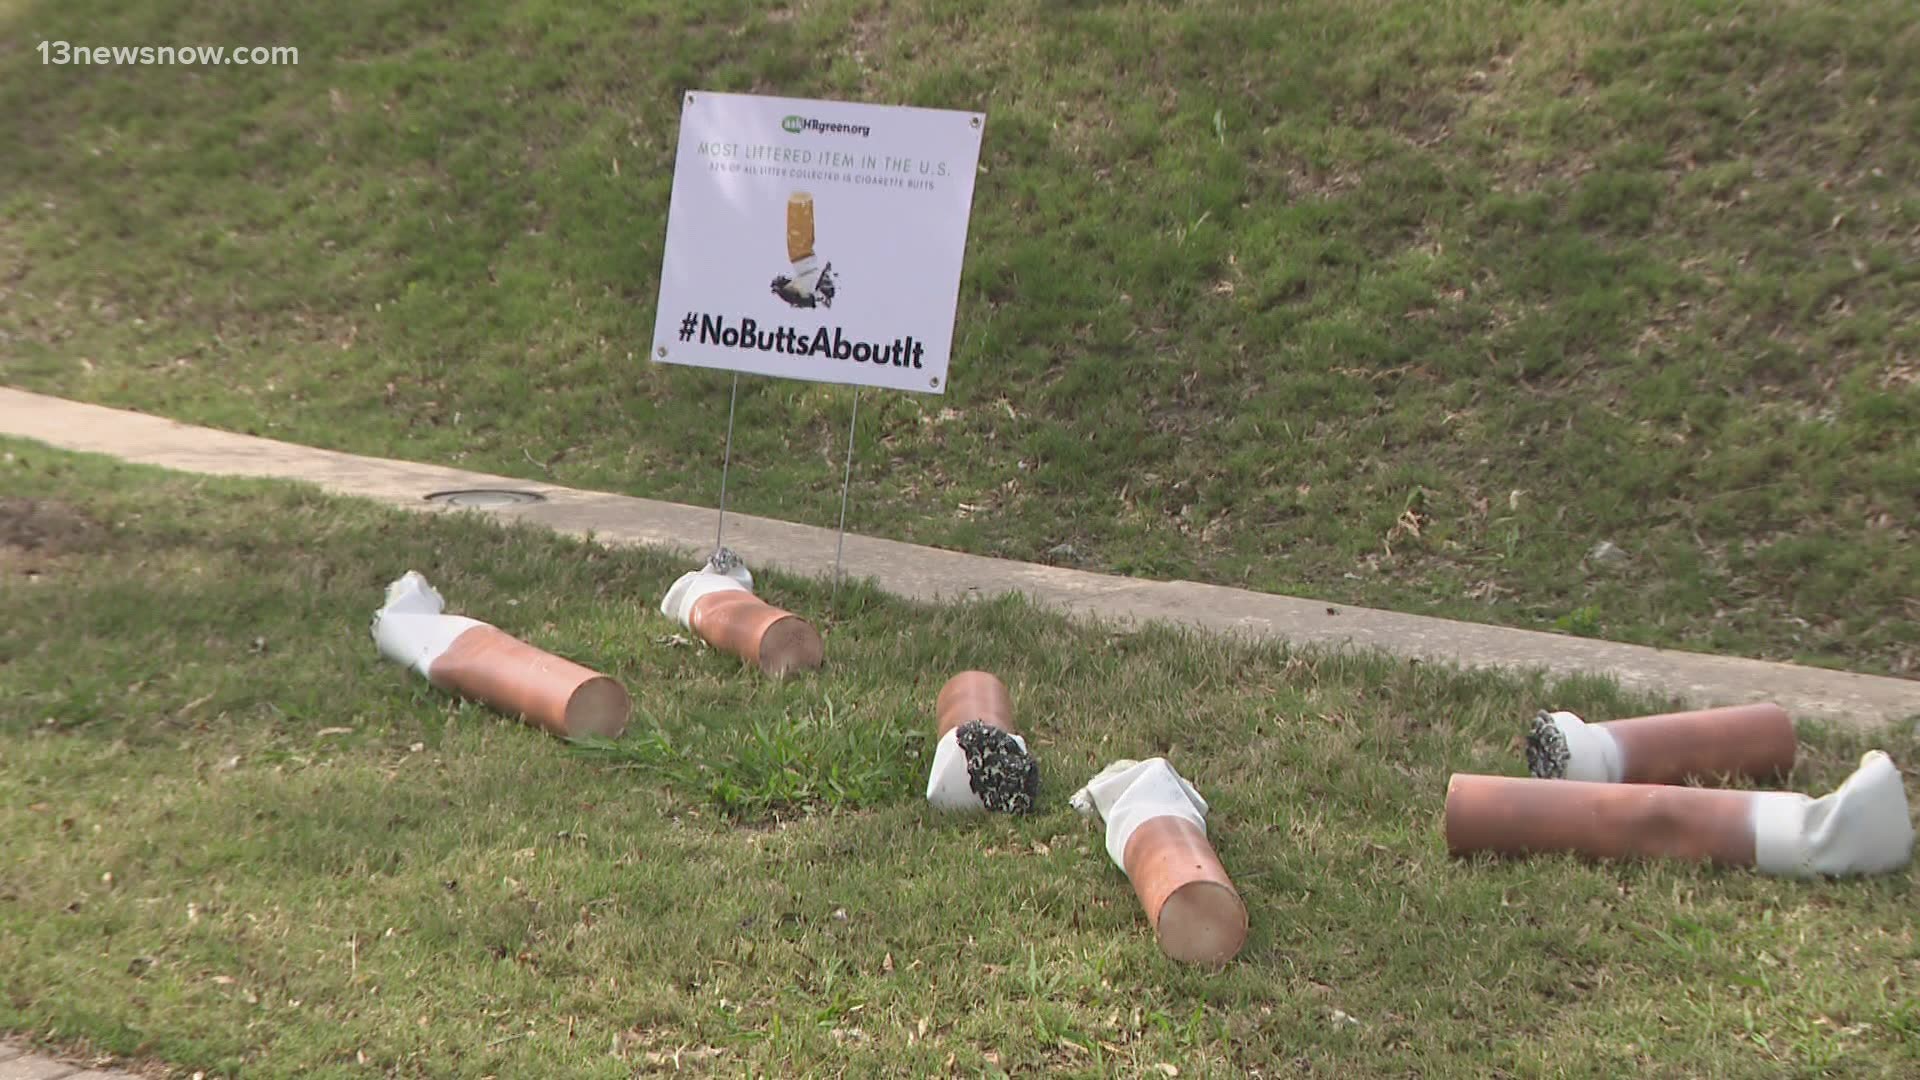 Large statues of cigarette butts are appearing in parks, centers, and more across the area are starting a conversation about the environmental impacts.